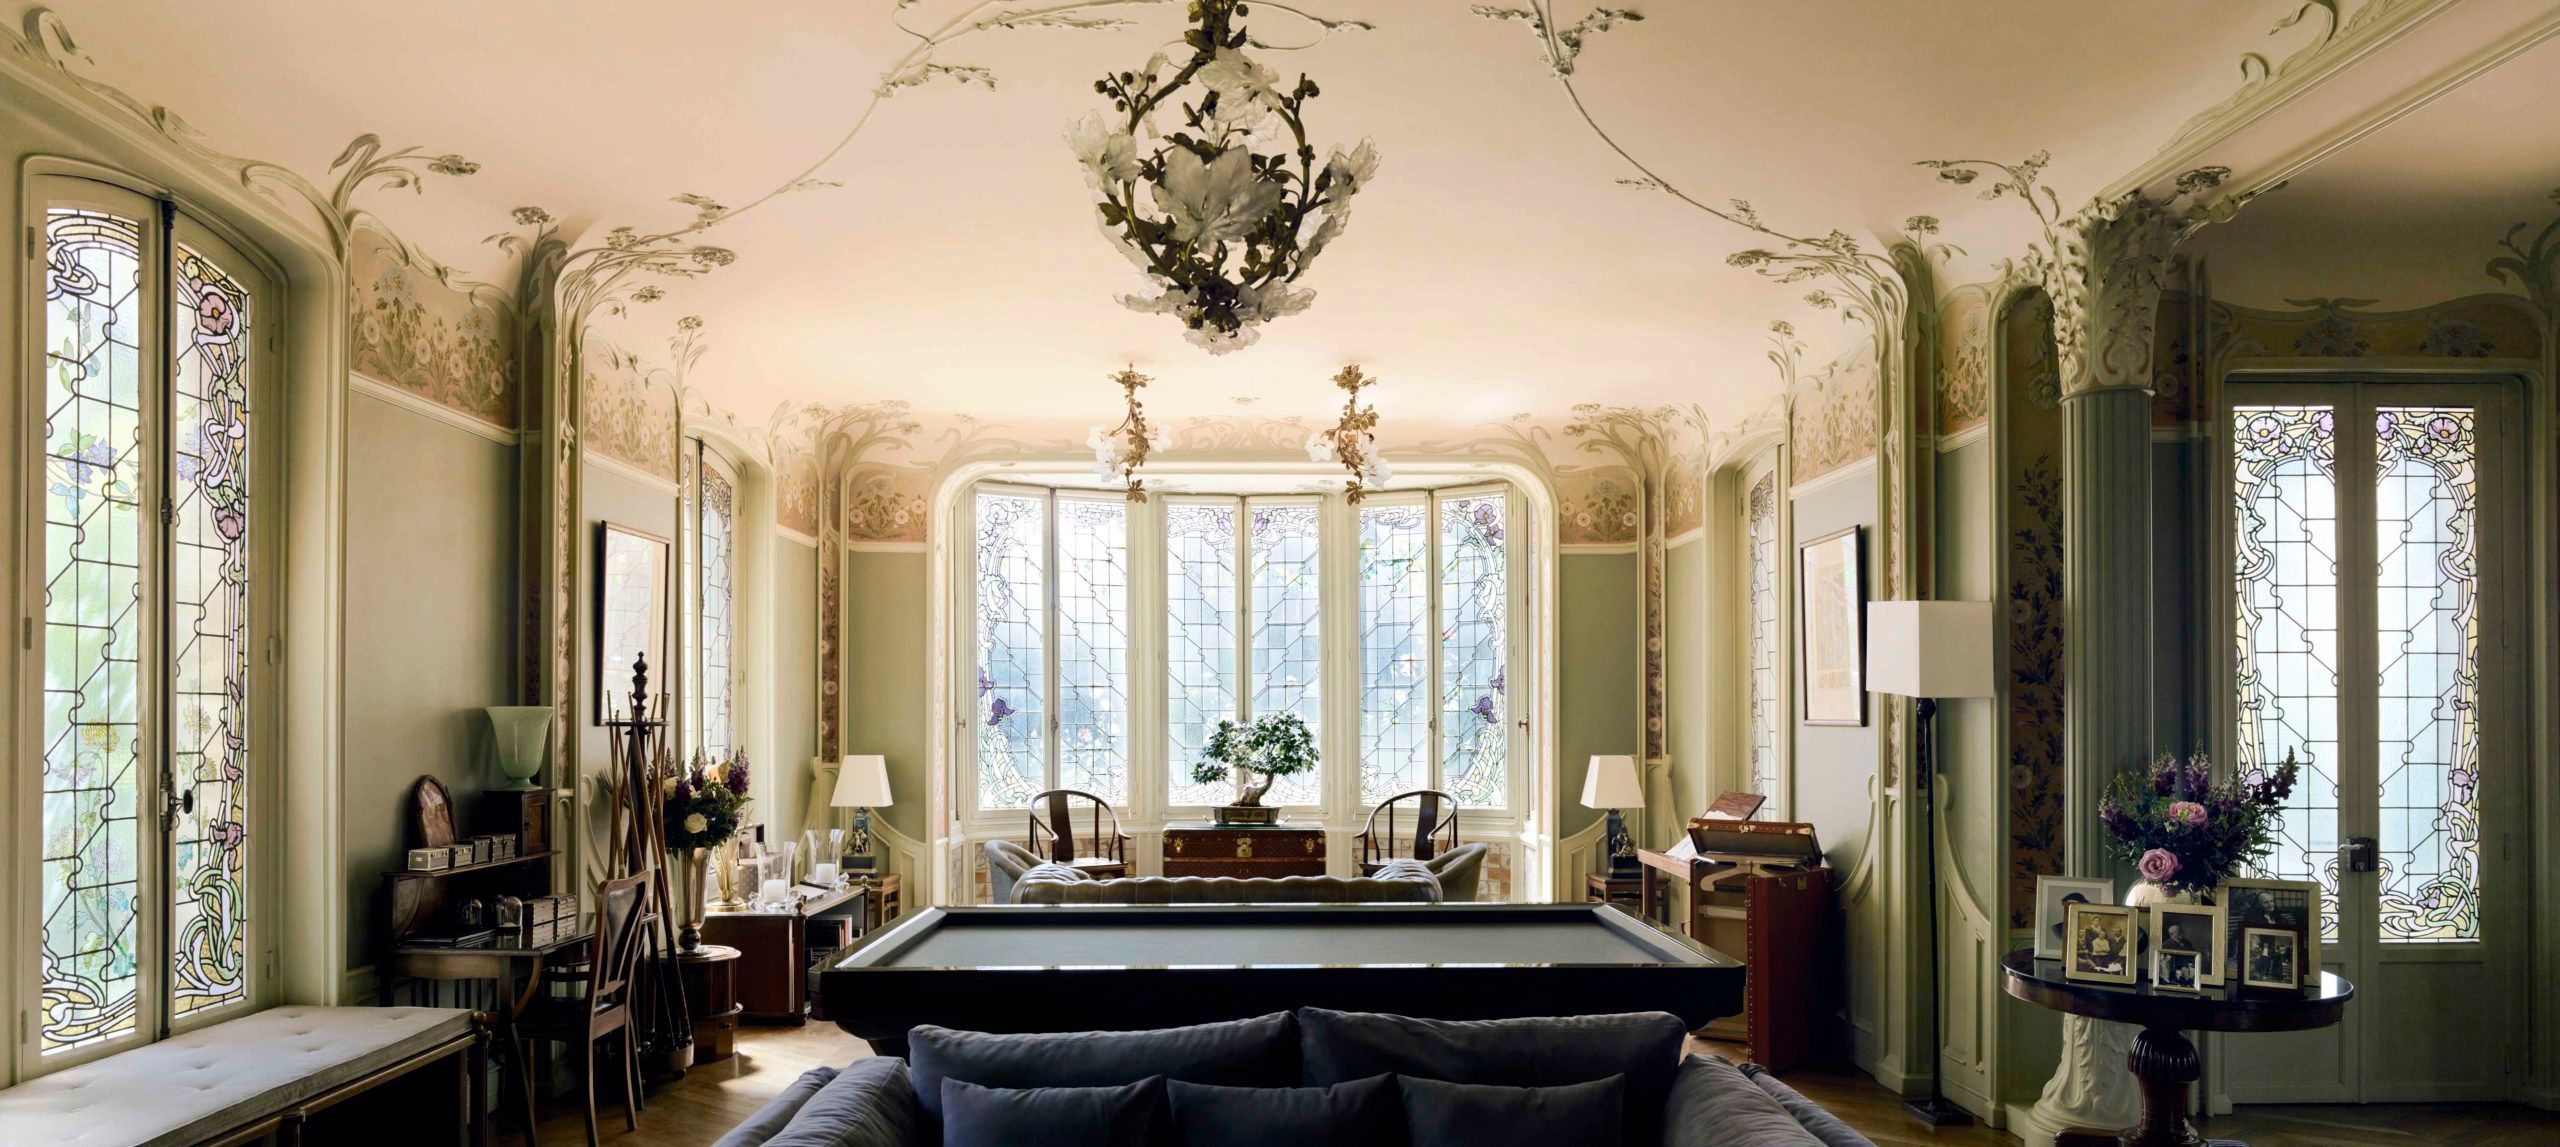 Tour the LOUIS VUITTON FAMILY HOME with me!, Gallery posted by Nanette